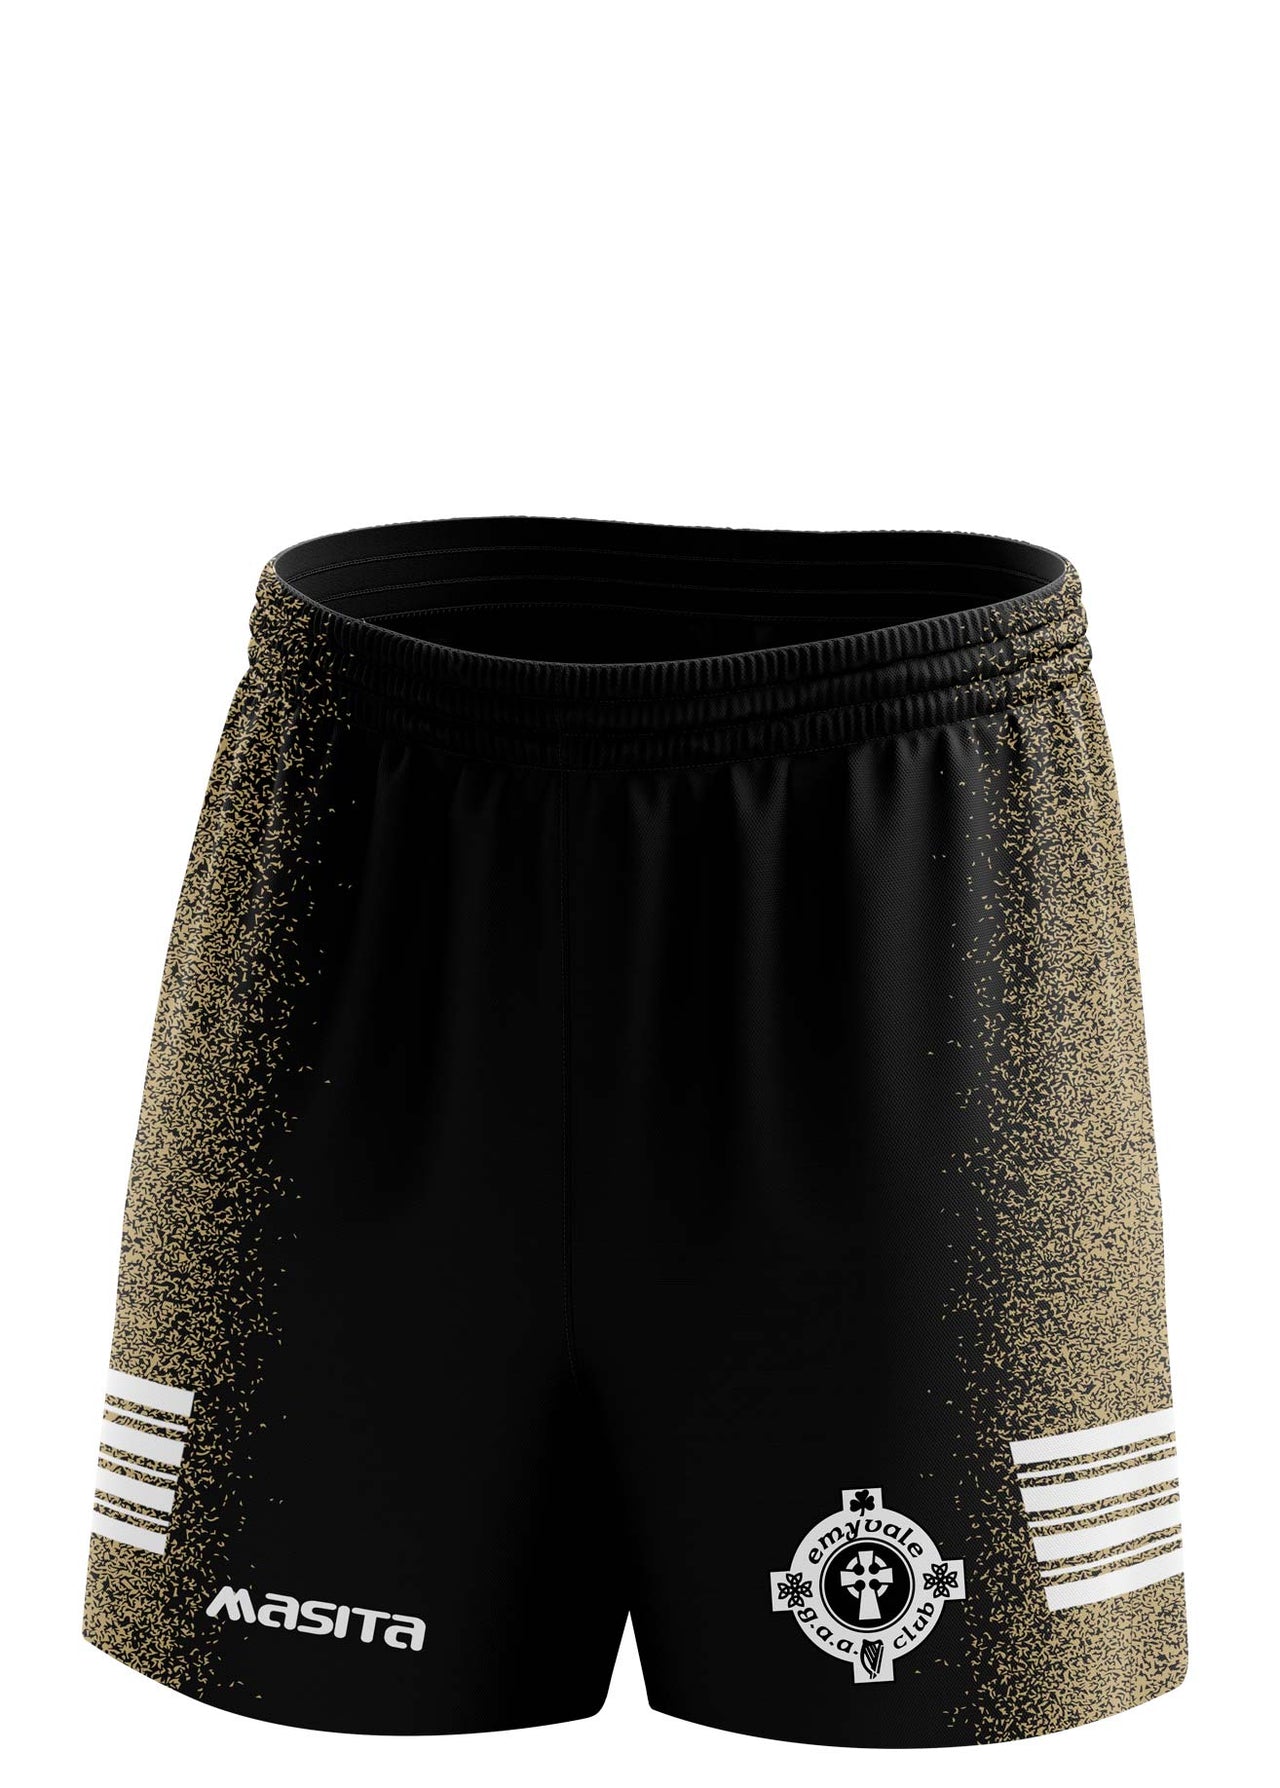 Emyvale GAA Comet Style Training Shorts Adult